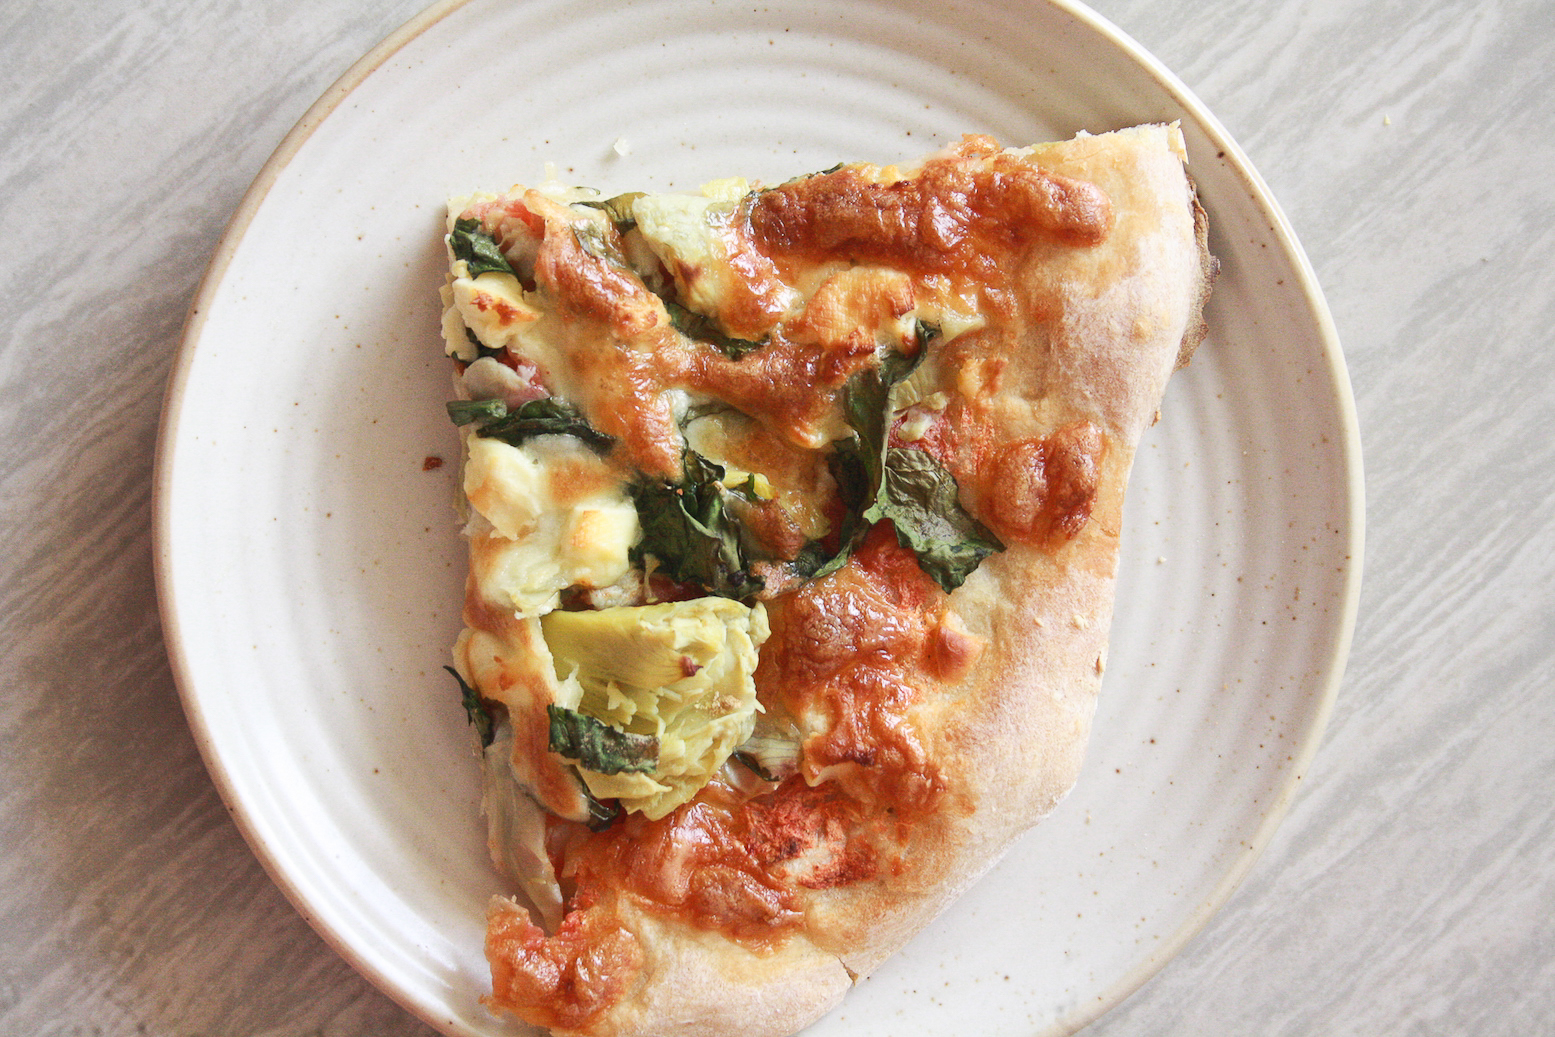 A chewy, deeply flavoured pizza crust topped with a simple tomato sauce, spinach and artichokes, plus lots of cheese!